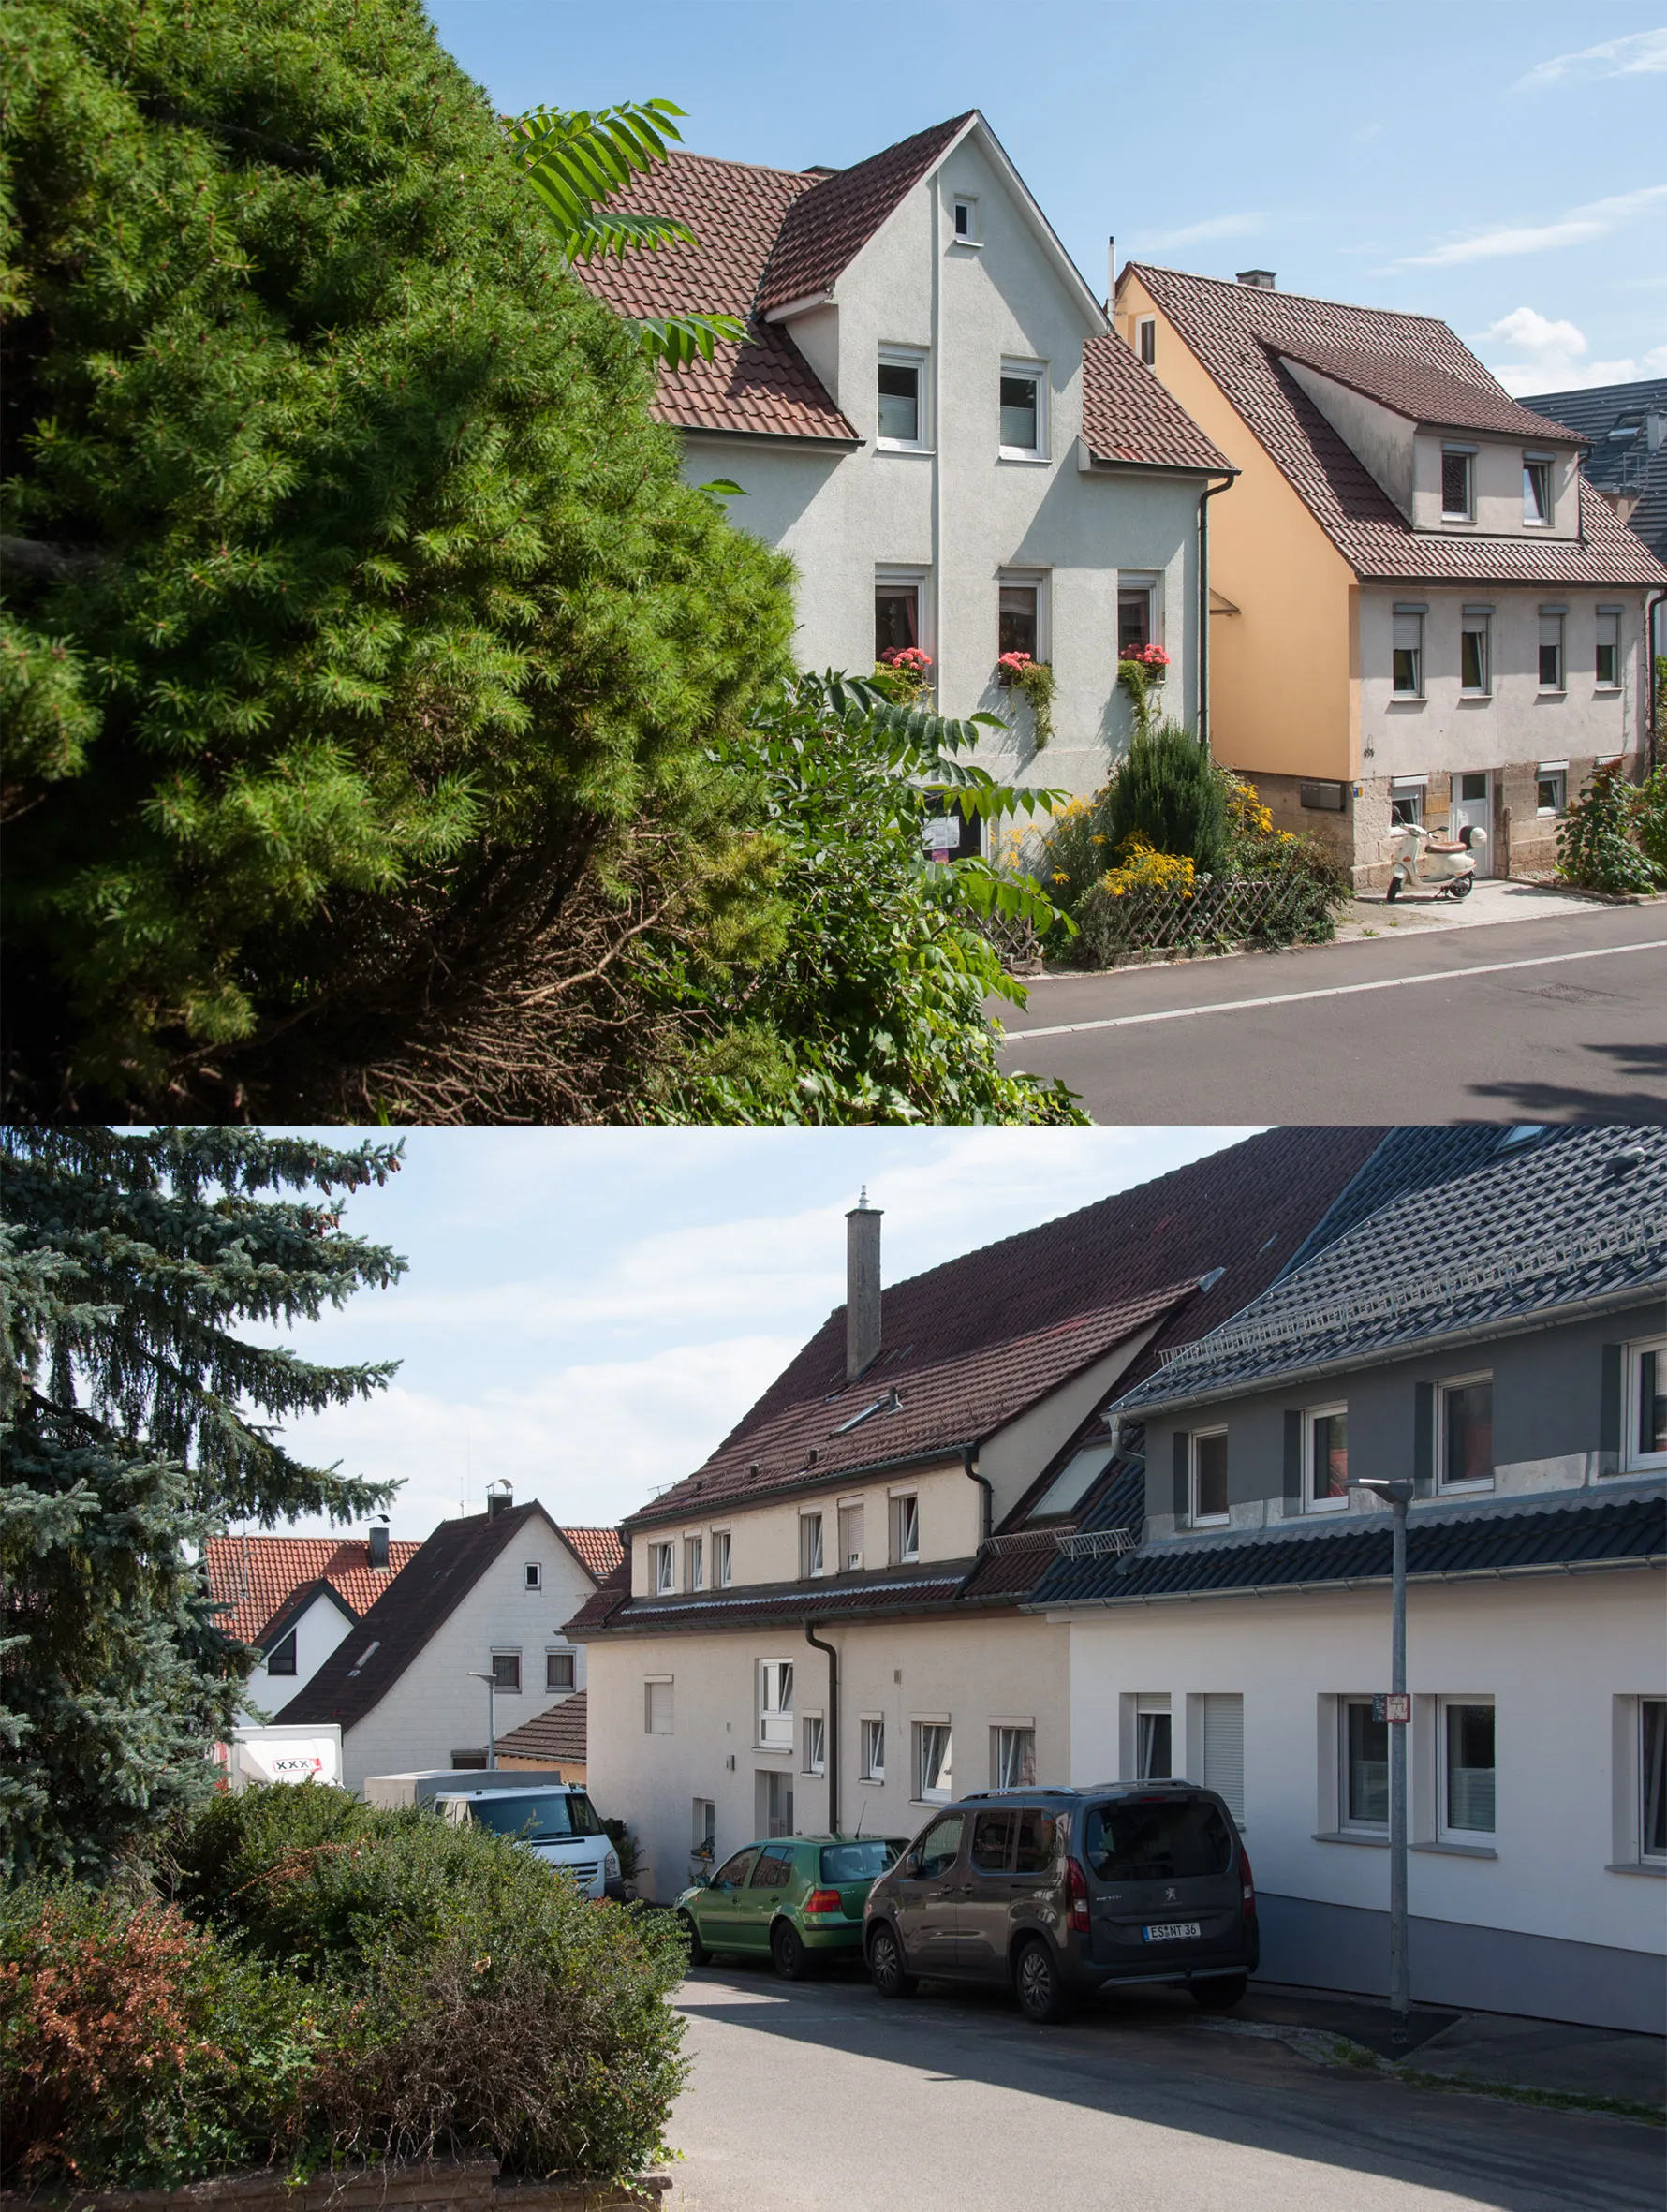 Photo showing: Upper picture: Sulzgrieser Straße, on the small top window of the Zwerchhaus you can see the rural tradition and the early modern construction.
lower picture: Paradiesweg, rural single-storey construction with dormers.